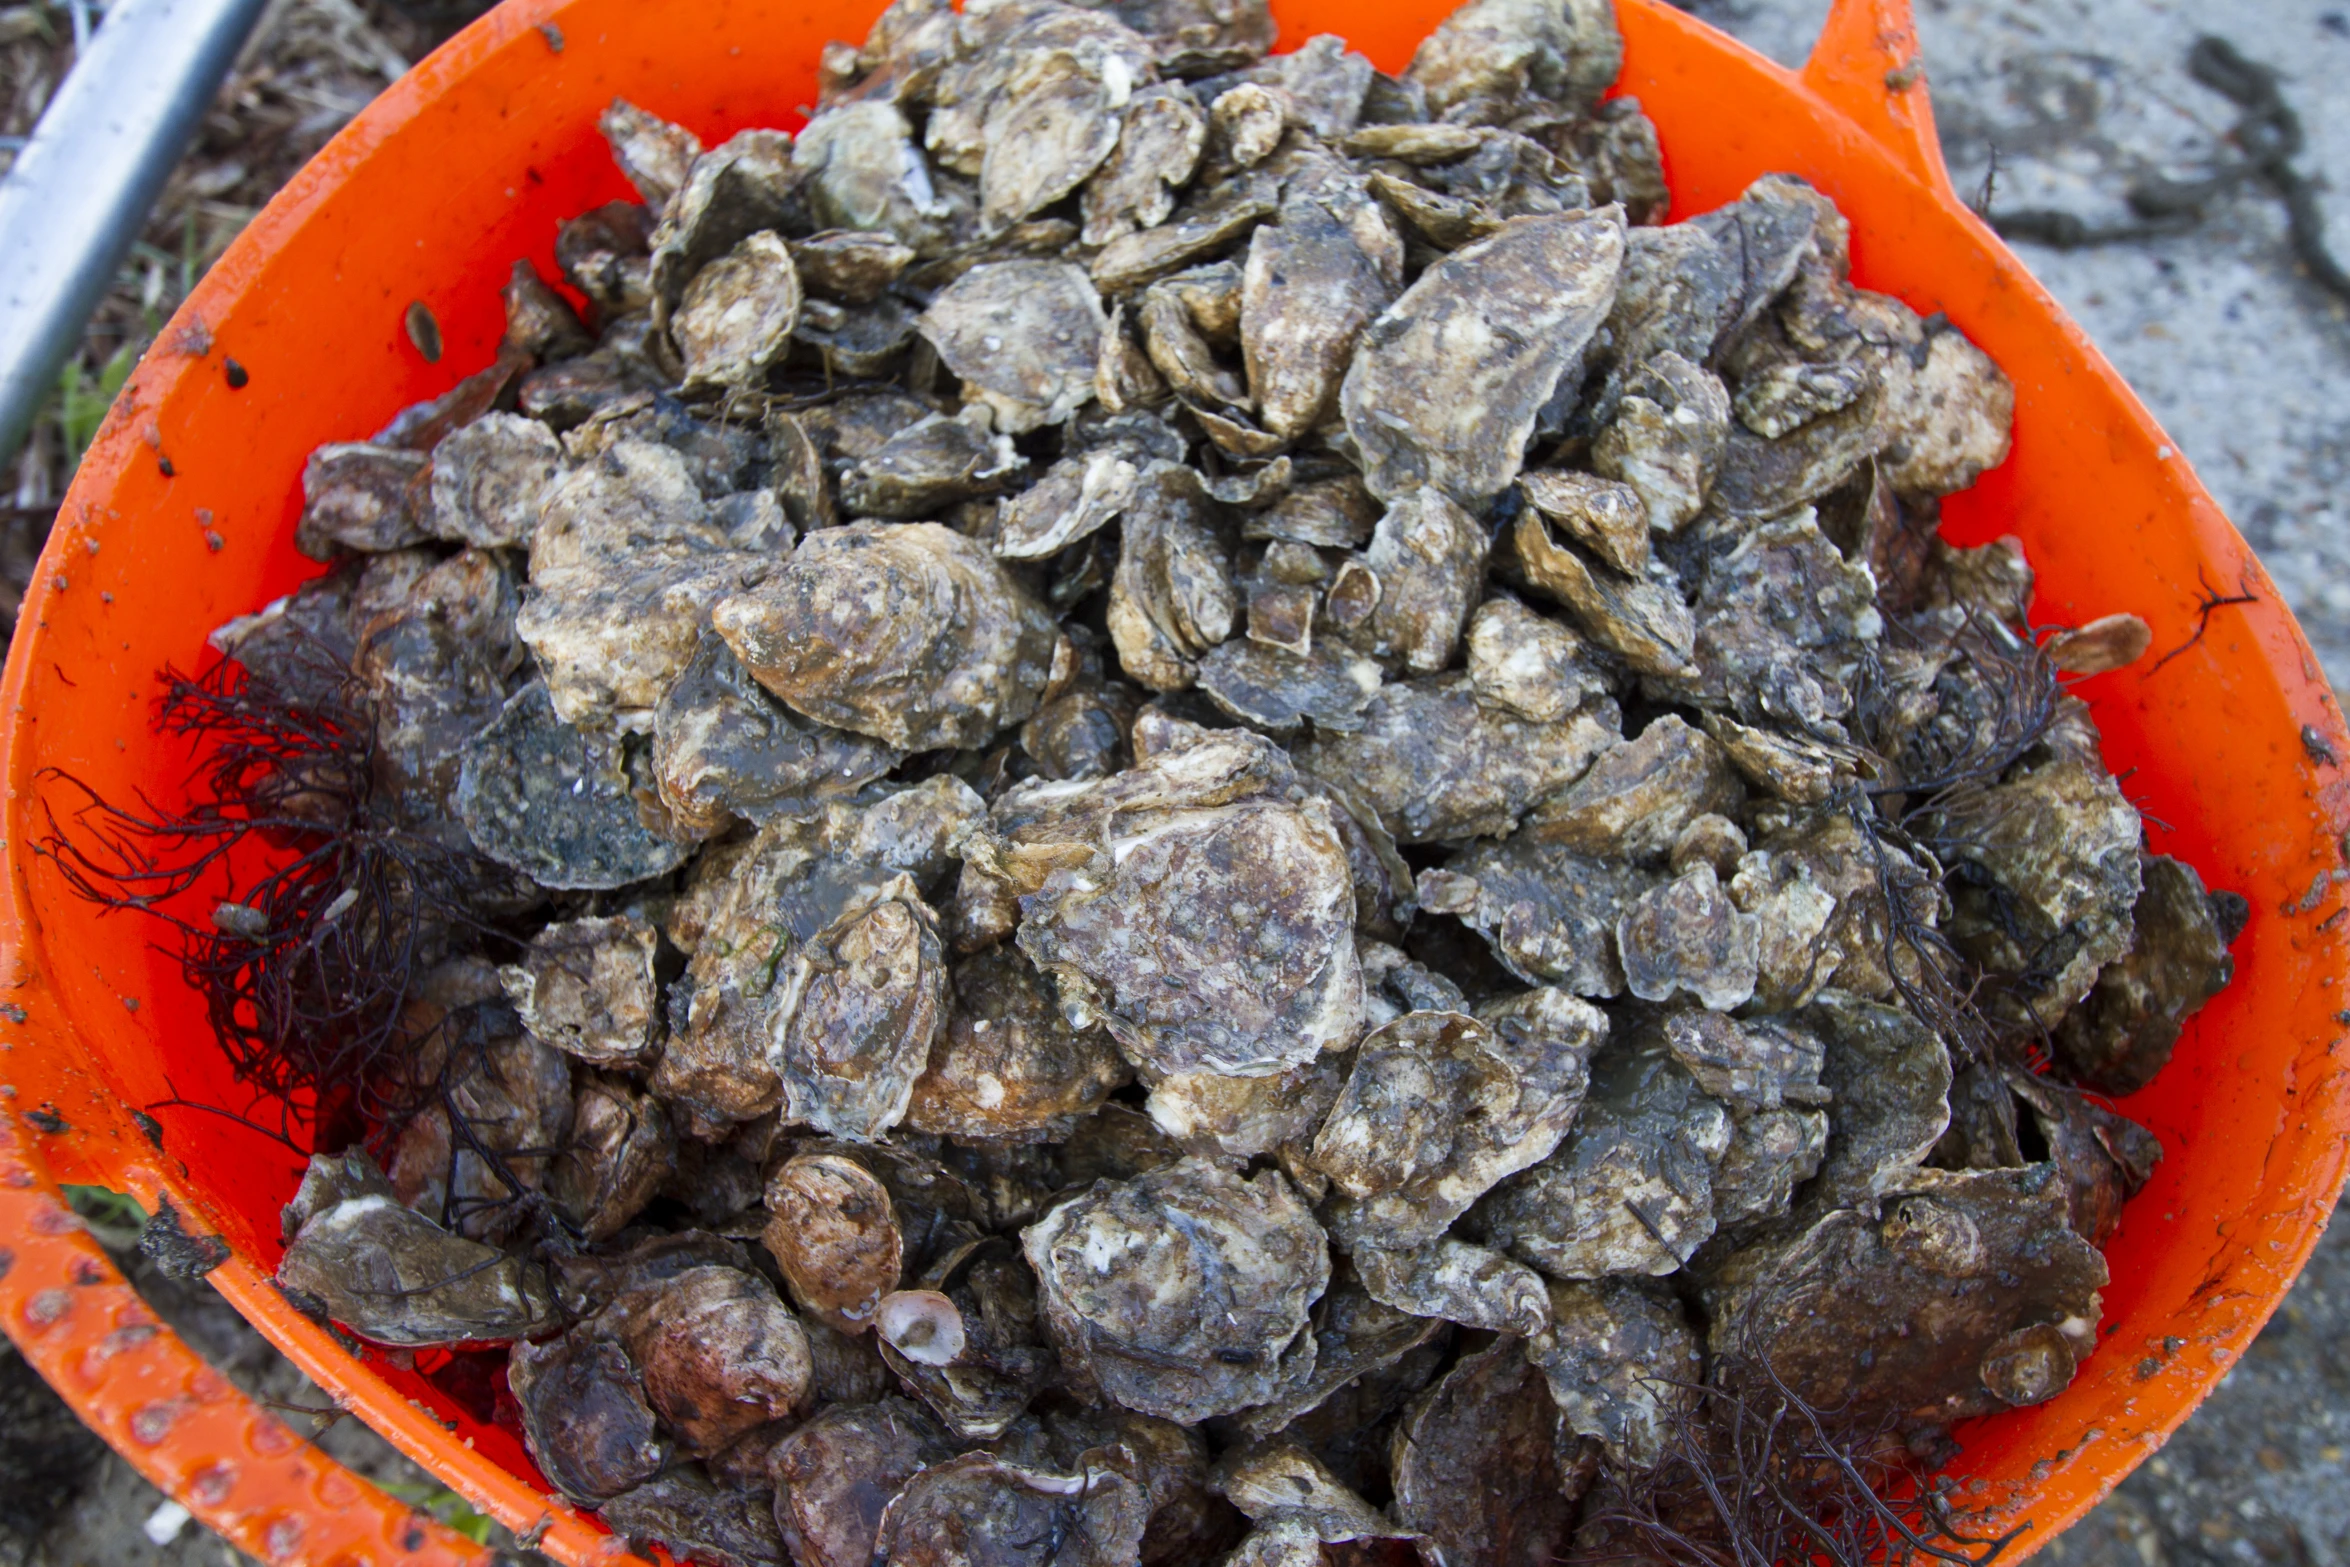 a container filled with mussels and dirt